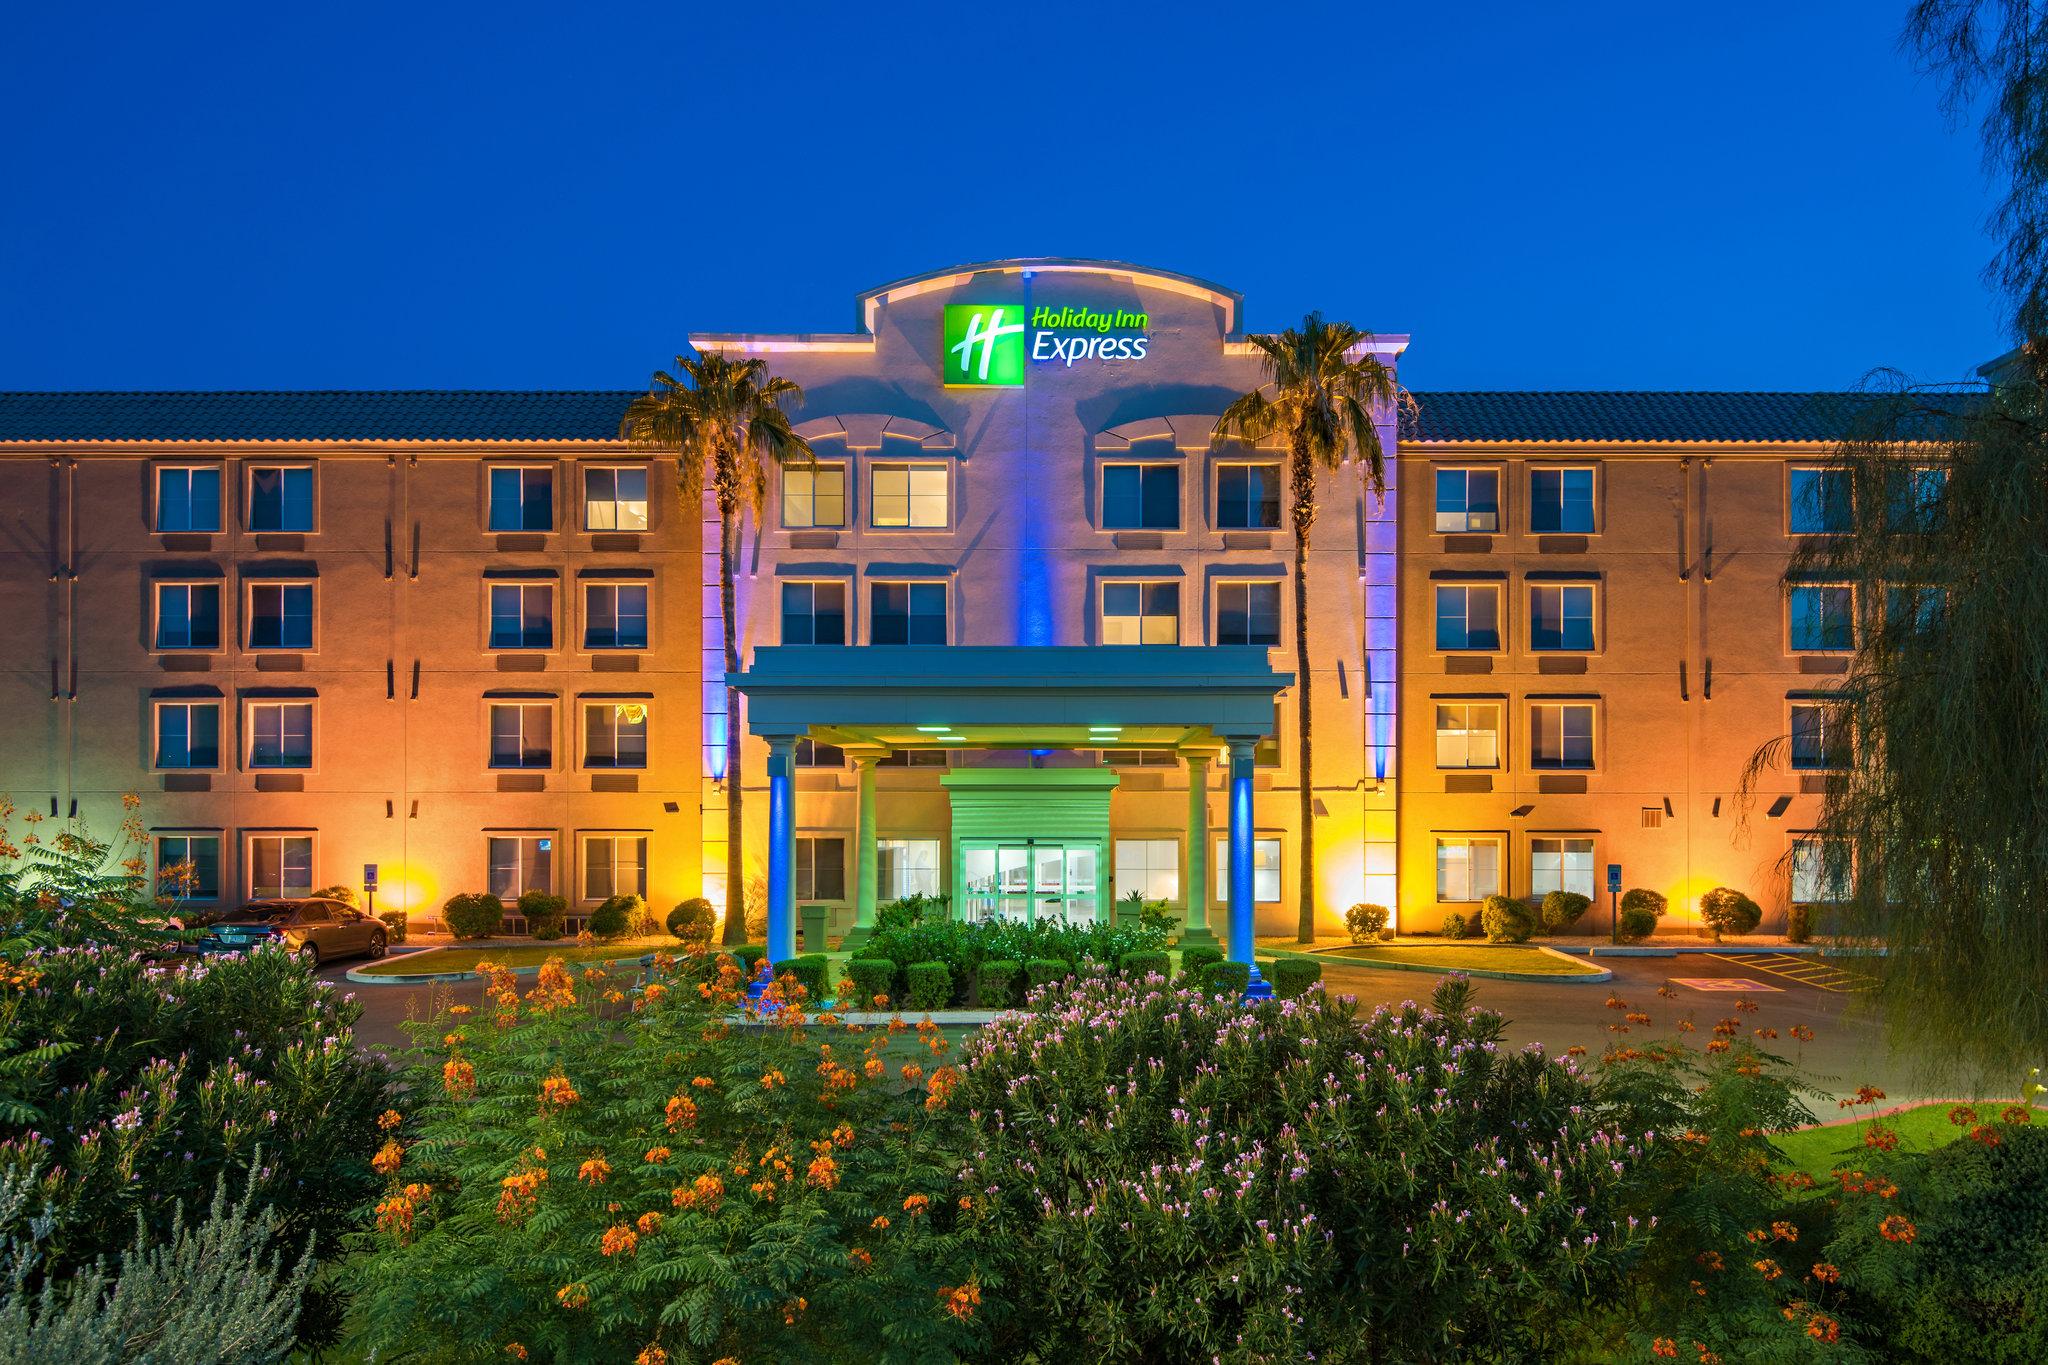 Holiday Inn Express Hotel & Suites Peoria North - Glendale in Peoria, AZ